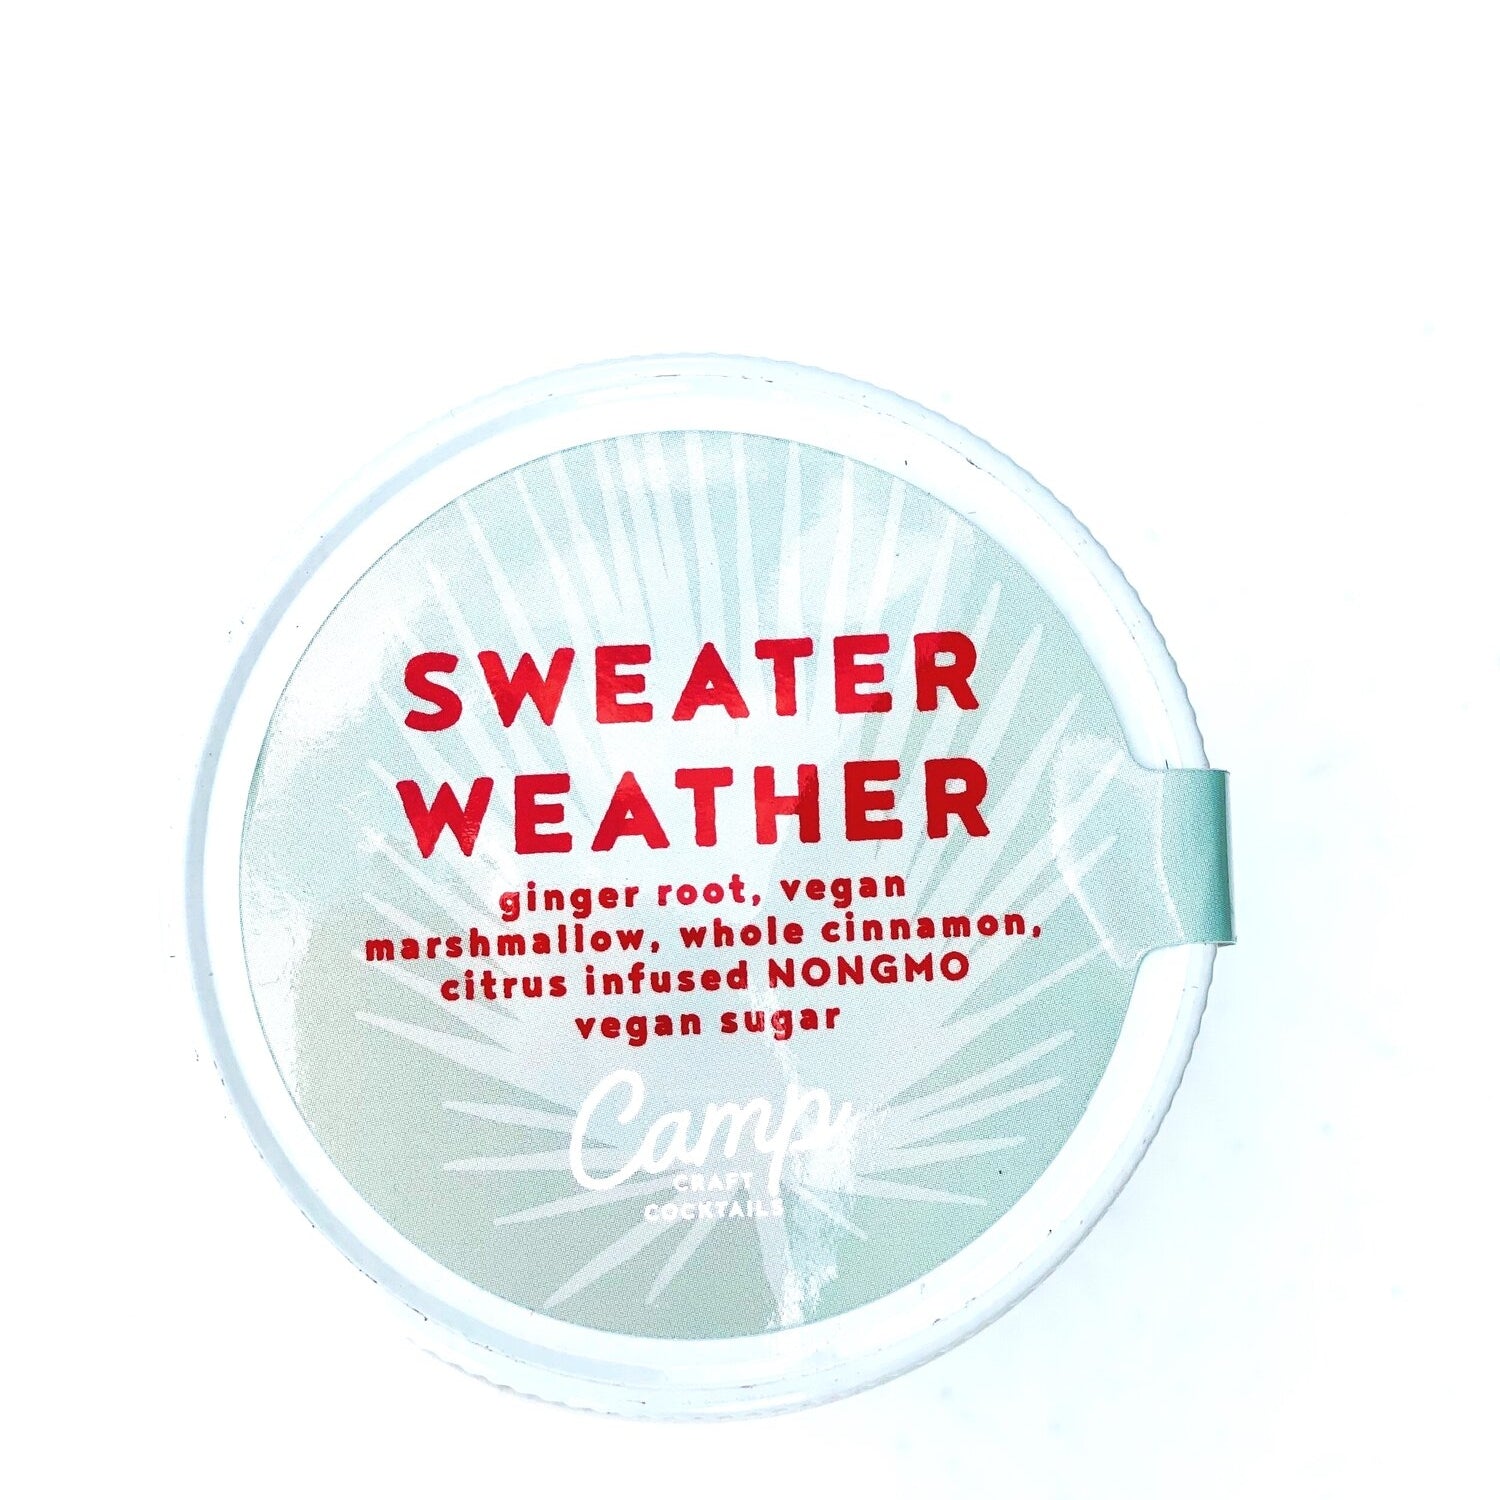 sweather weather craft cocktail kit